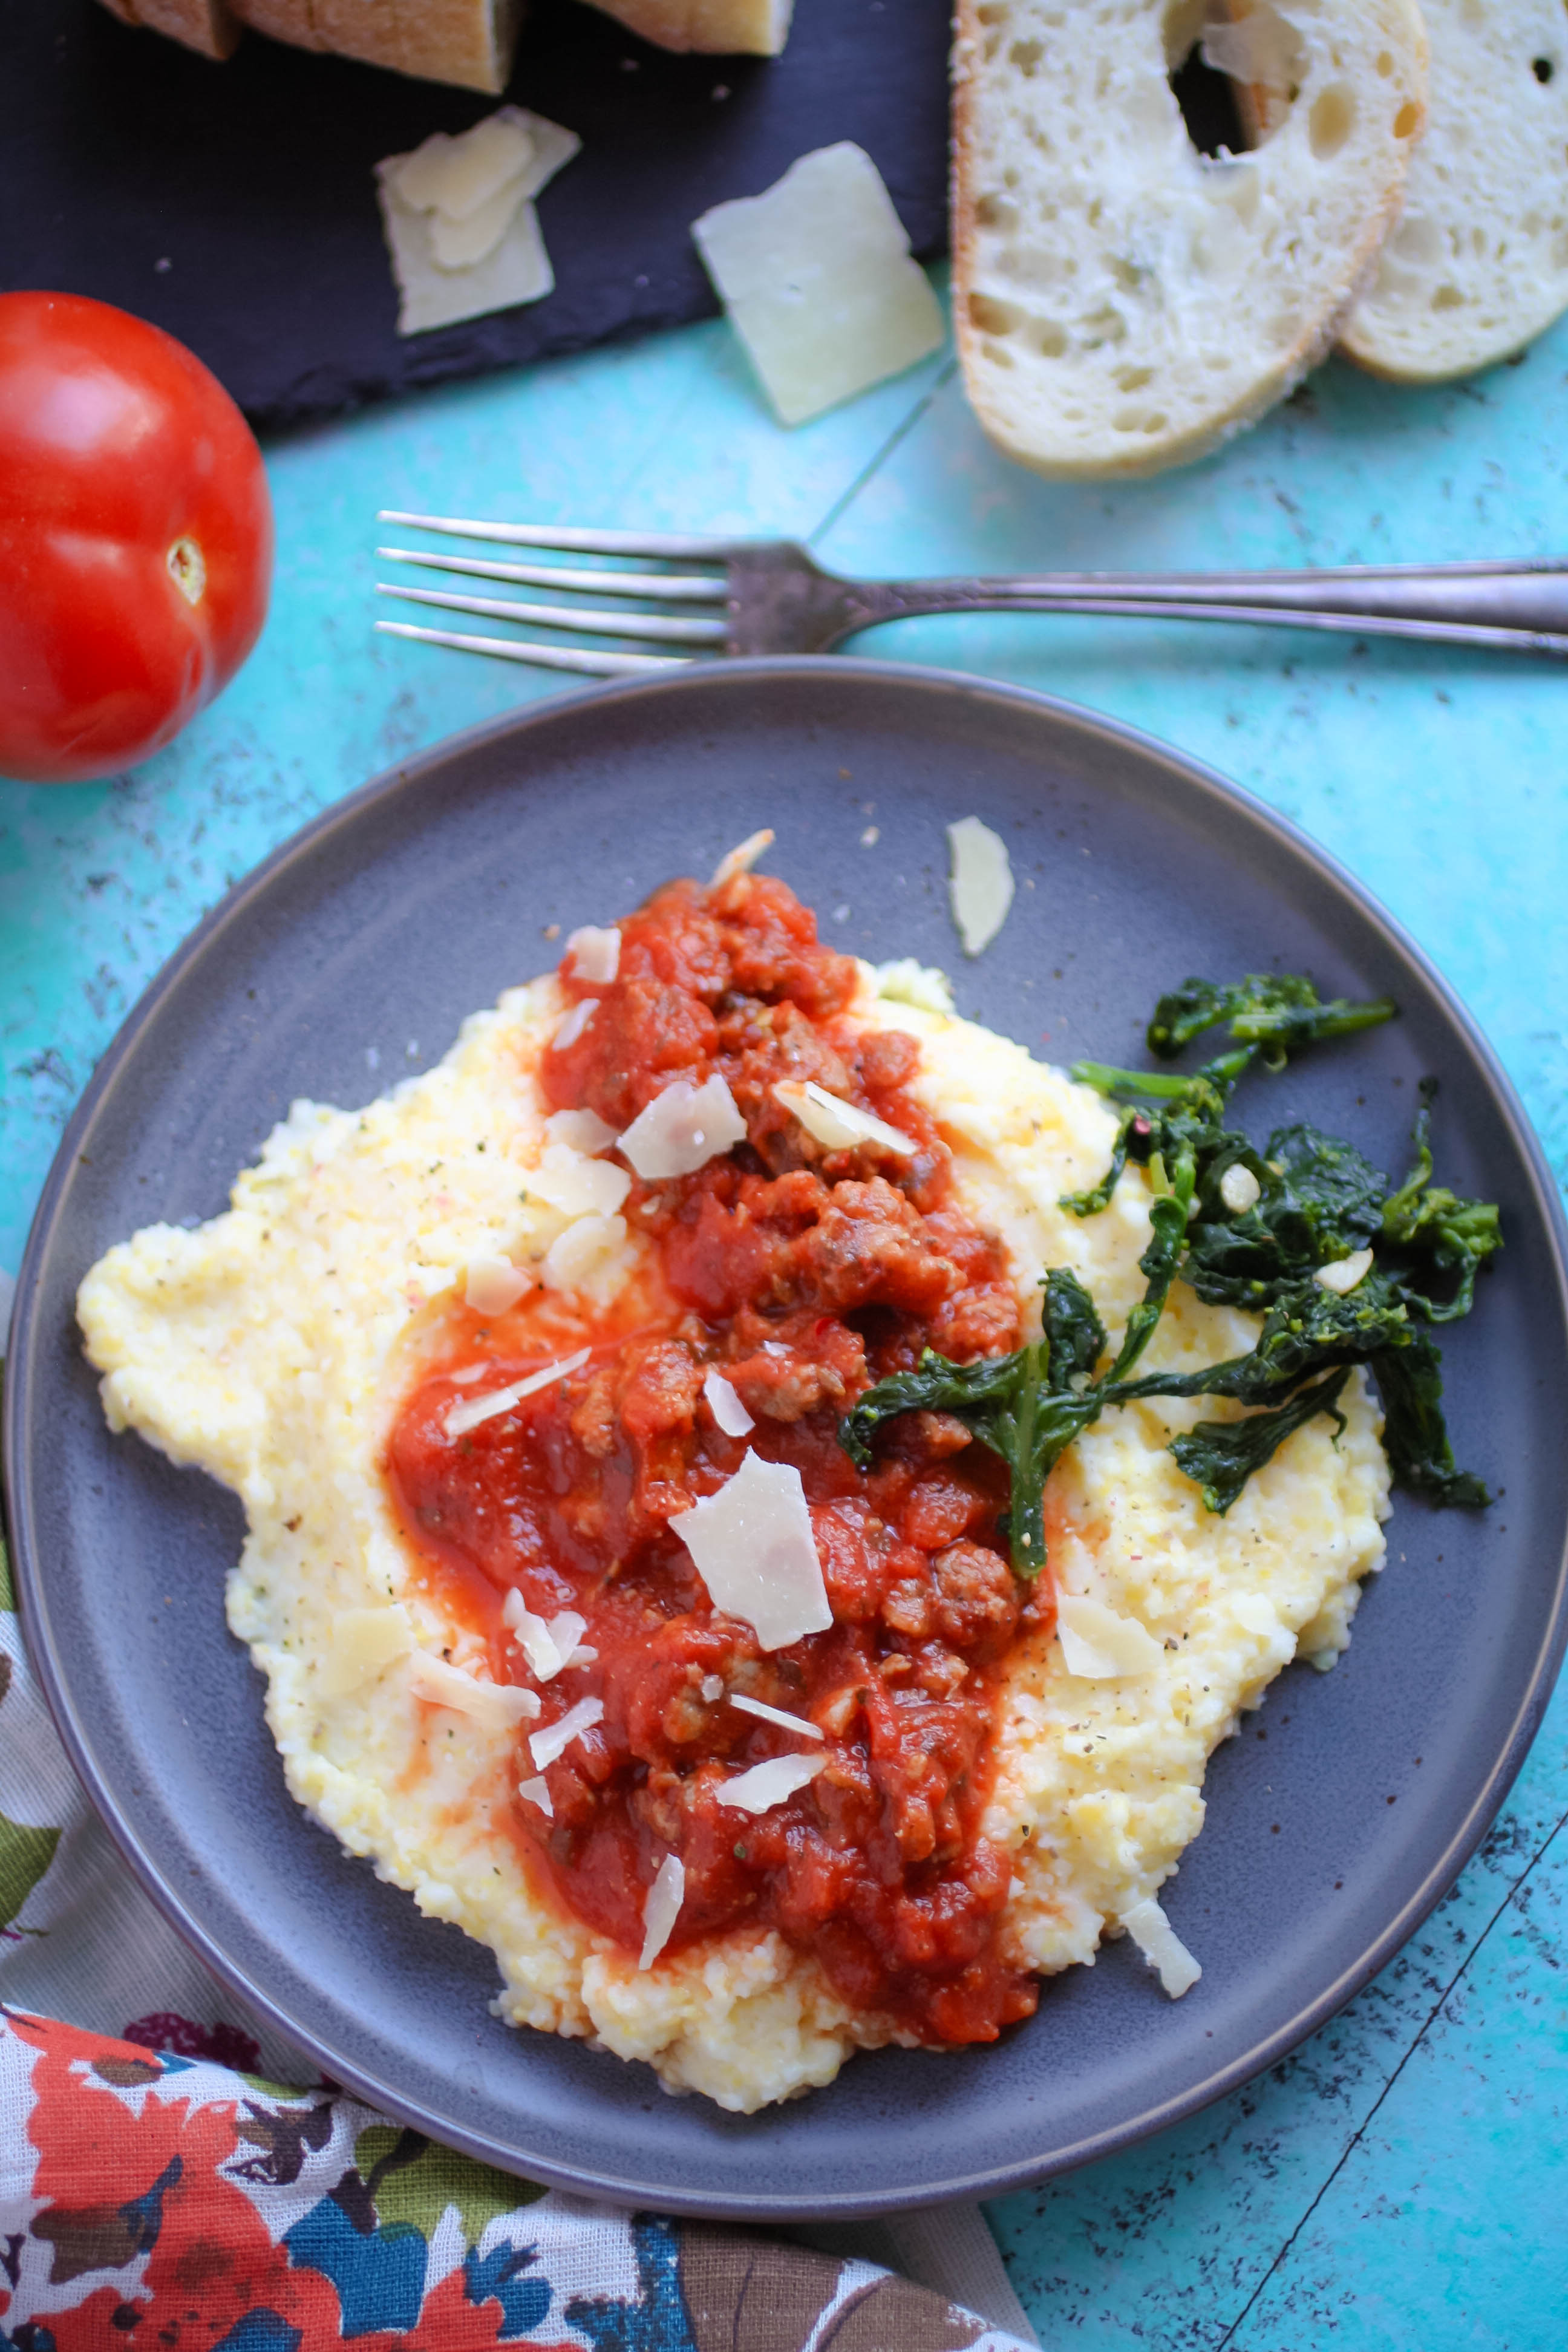 Polenta with Sausage and Red Sauce is an easy-to-make winter favorite! Make Polenta with Sausage and Red Sauce this winter!